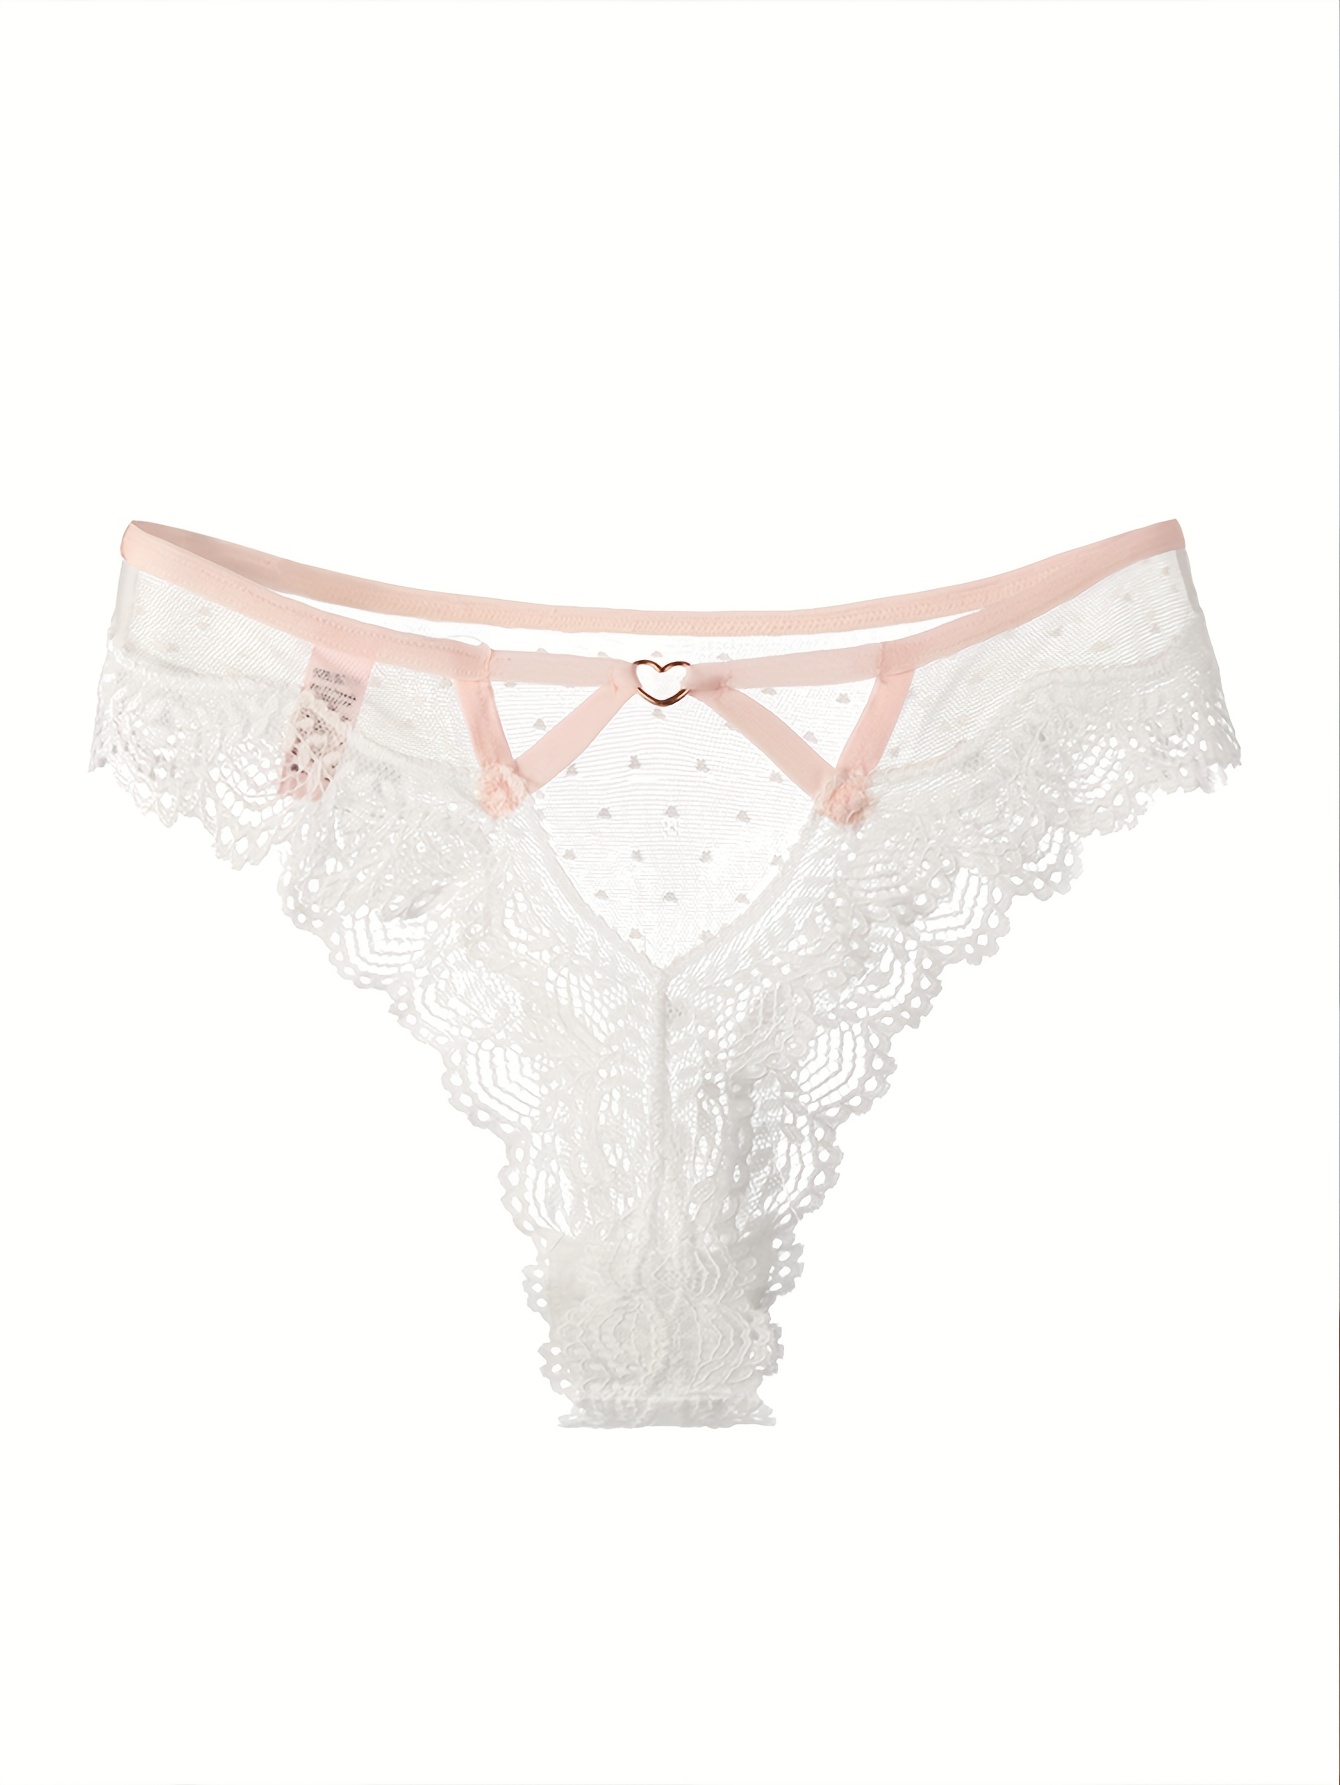 New Lace Tranparent Thong Underwear Female Thongs Hollow Out